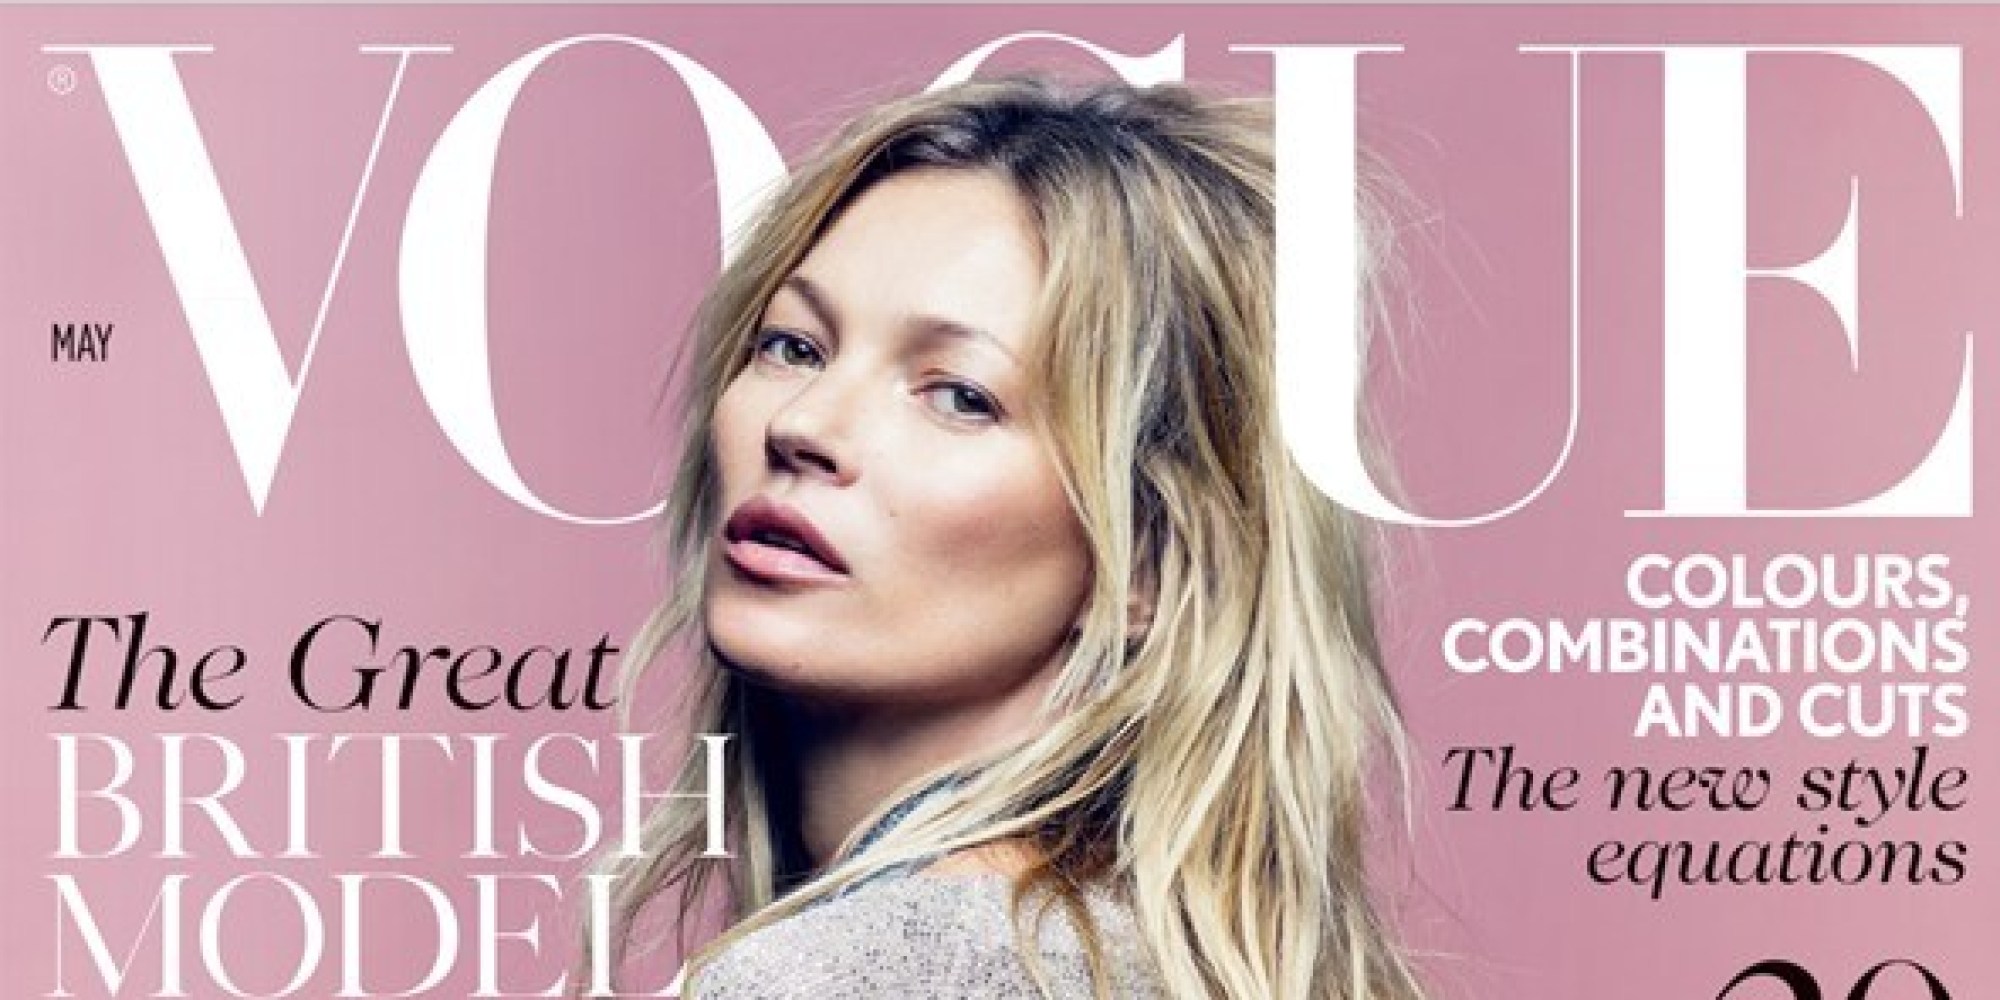 Kate Moss Lands Her First British Vogue Cover.. As Fashion Editor